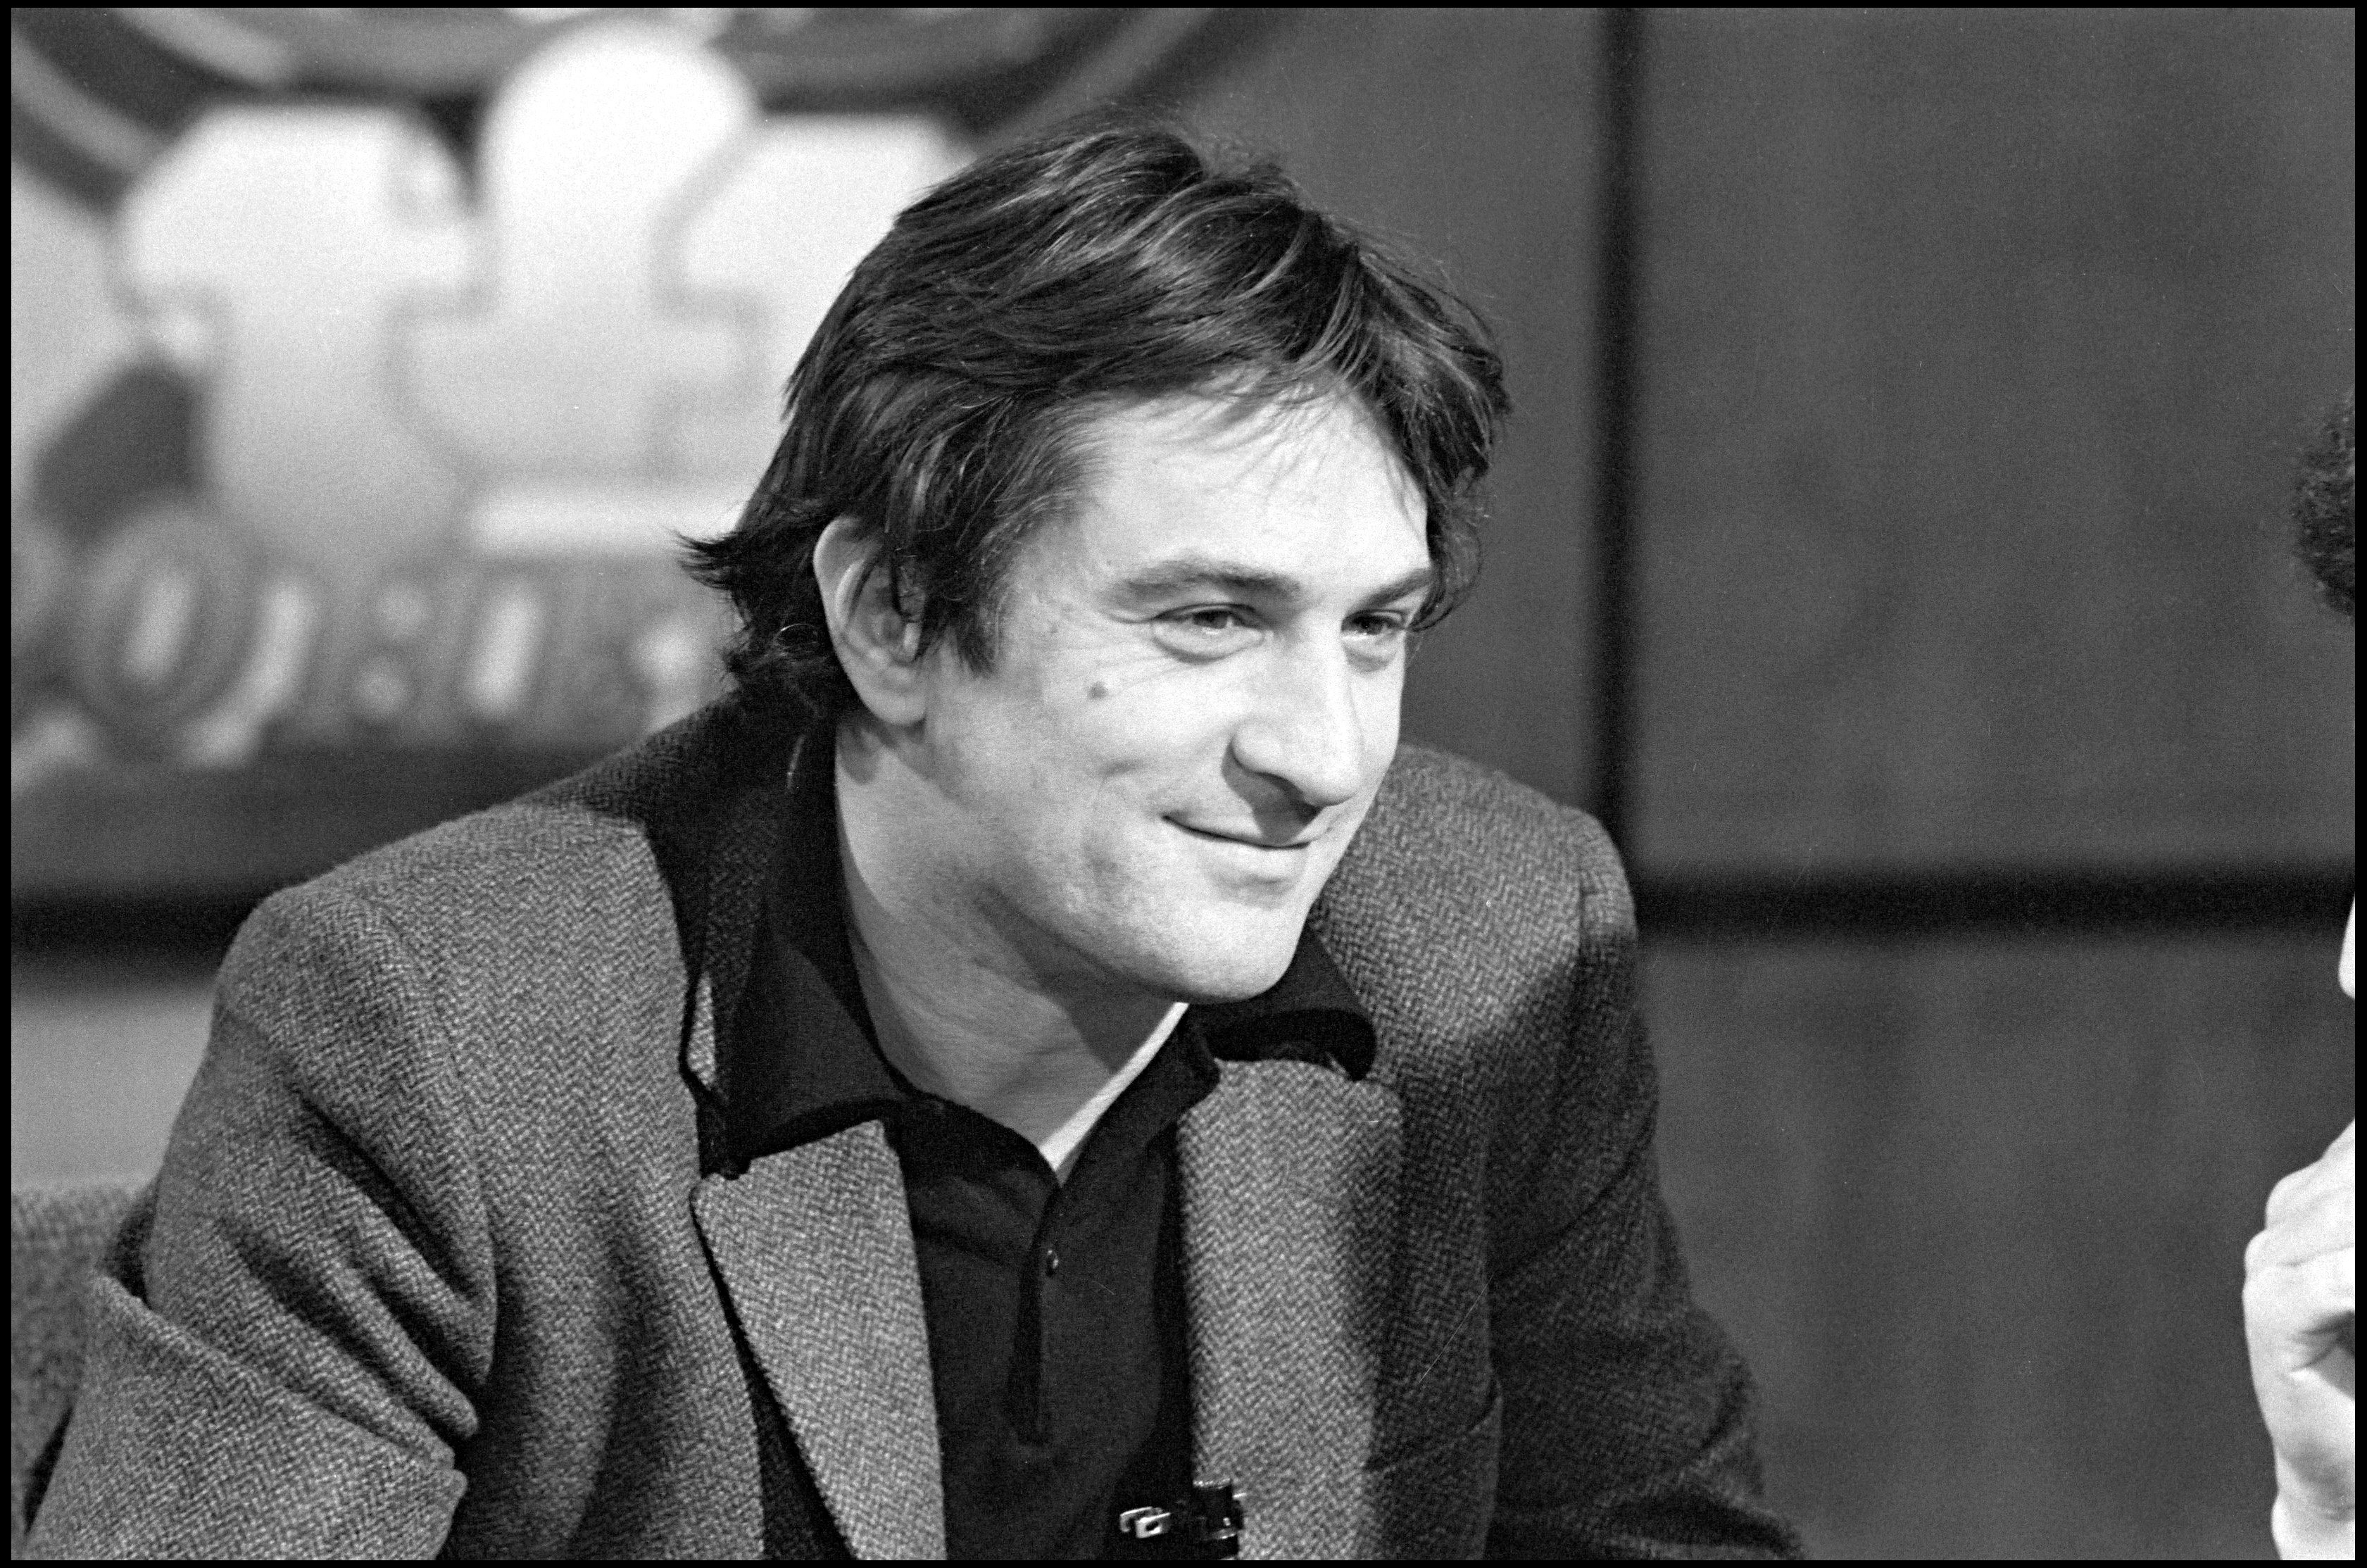 Robert de Niro at the evening news of channel Tf1 on February 12, 1981 | Source: Getty Images